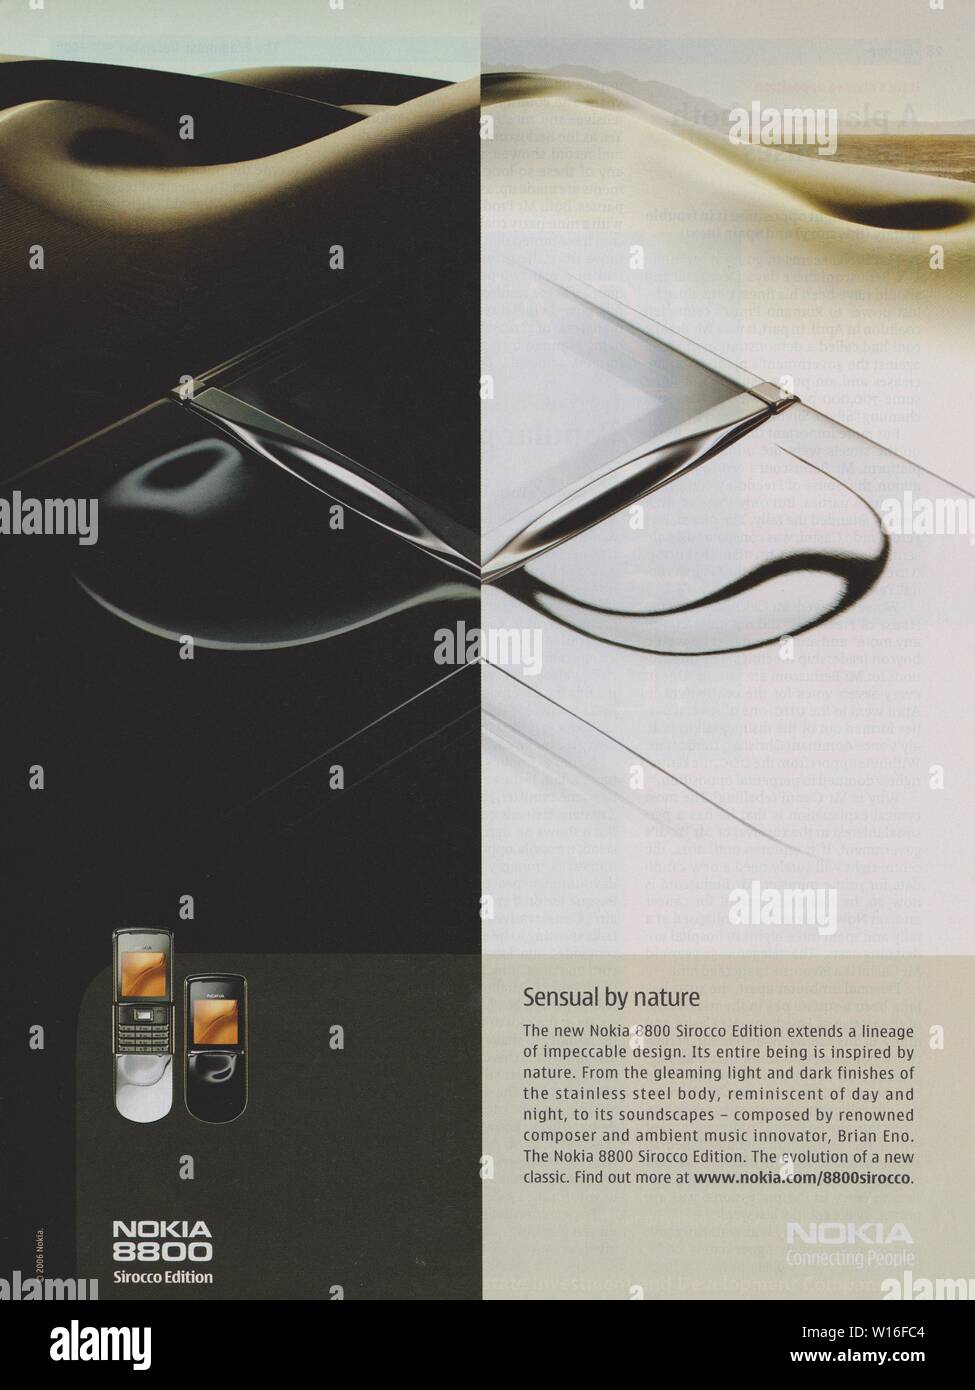 poster advertising Nokia 8800 phone in paper magazine from 2006 year, NOKIA Connecting People slogan, advertisement, creative Nokia advert from 2000s Stock Photo